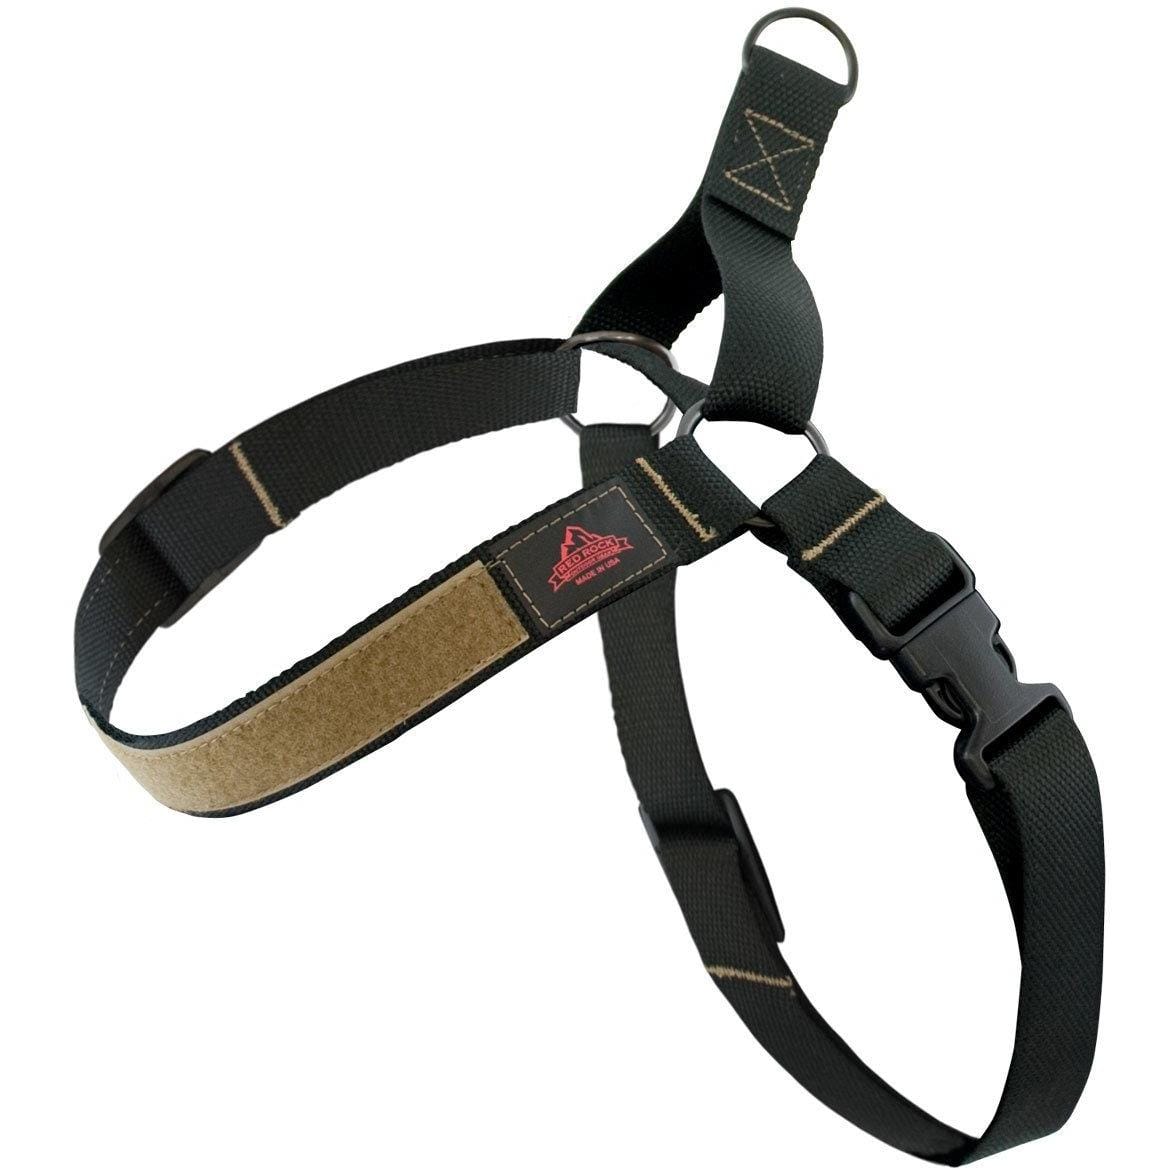 United States Tactical Tactical Gear M / Black United States Tactical Dog Harness